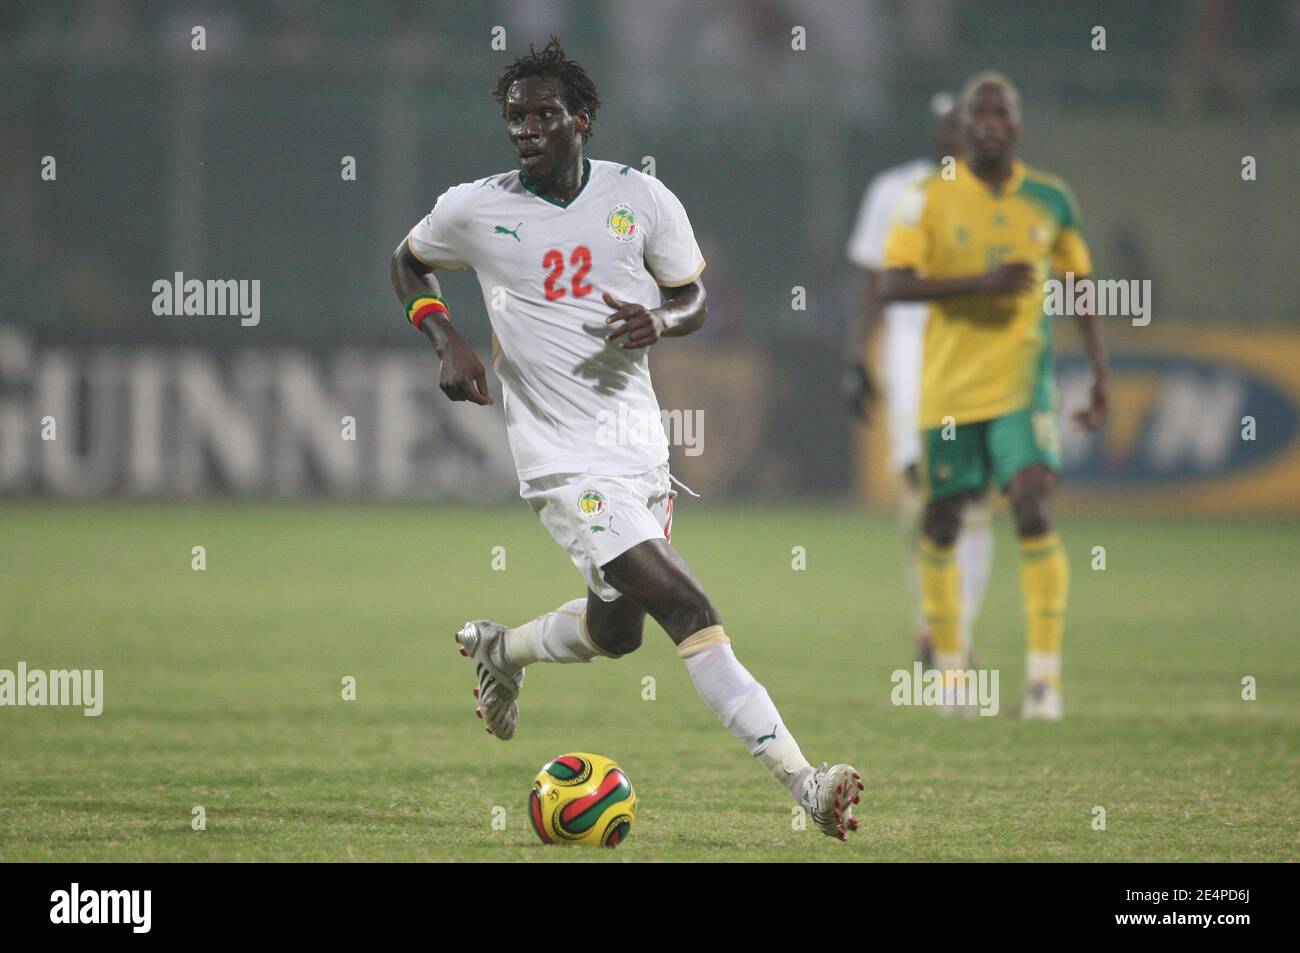 Senegal's Malick Ba Papa during the African Cup of Nations soccer match, Senegal vs South Africa in Kumasi, Ghana on January 31, 2008. The match ended in a 1-1 draw. Senegal failed to qualify for the next round of the competition. Photo by Steeve McMay/Cameleon/ABACAPRESS.COM Stock Photo